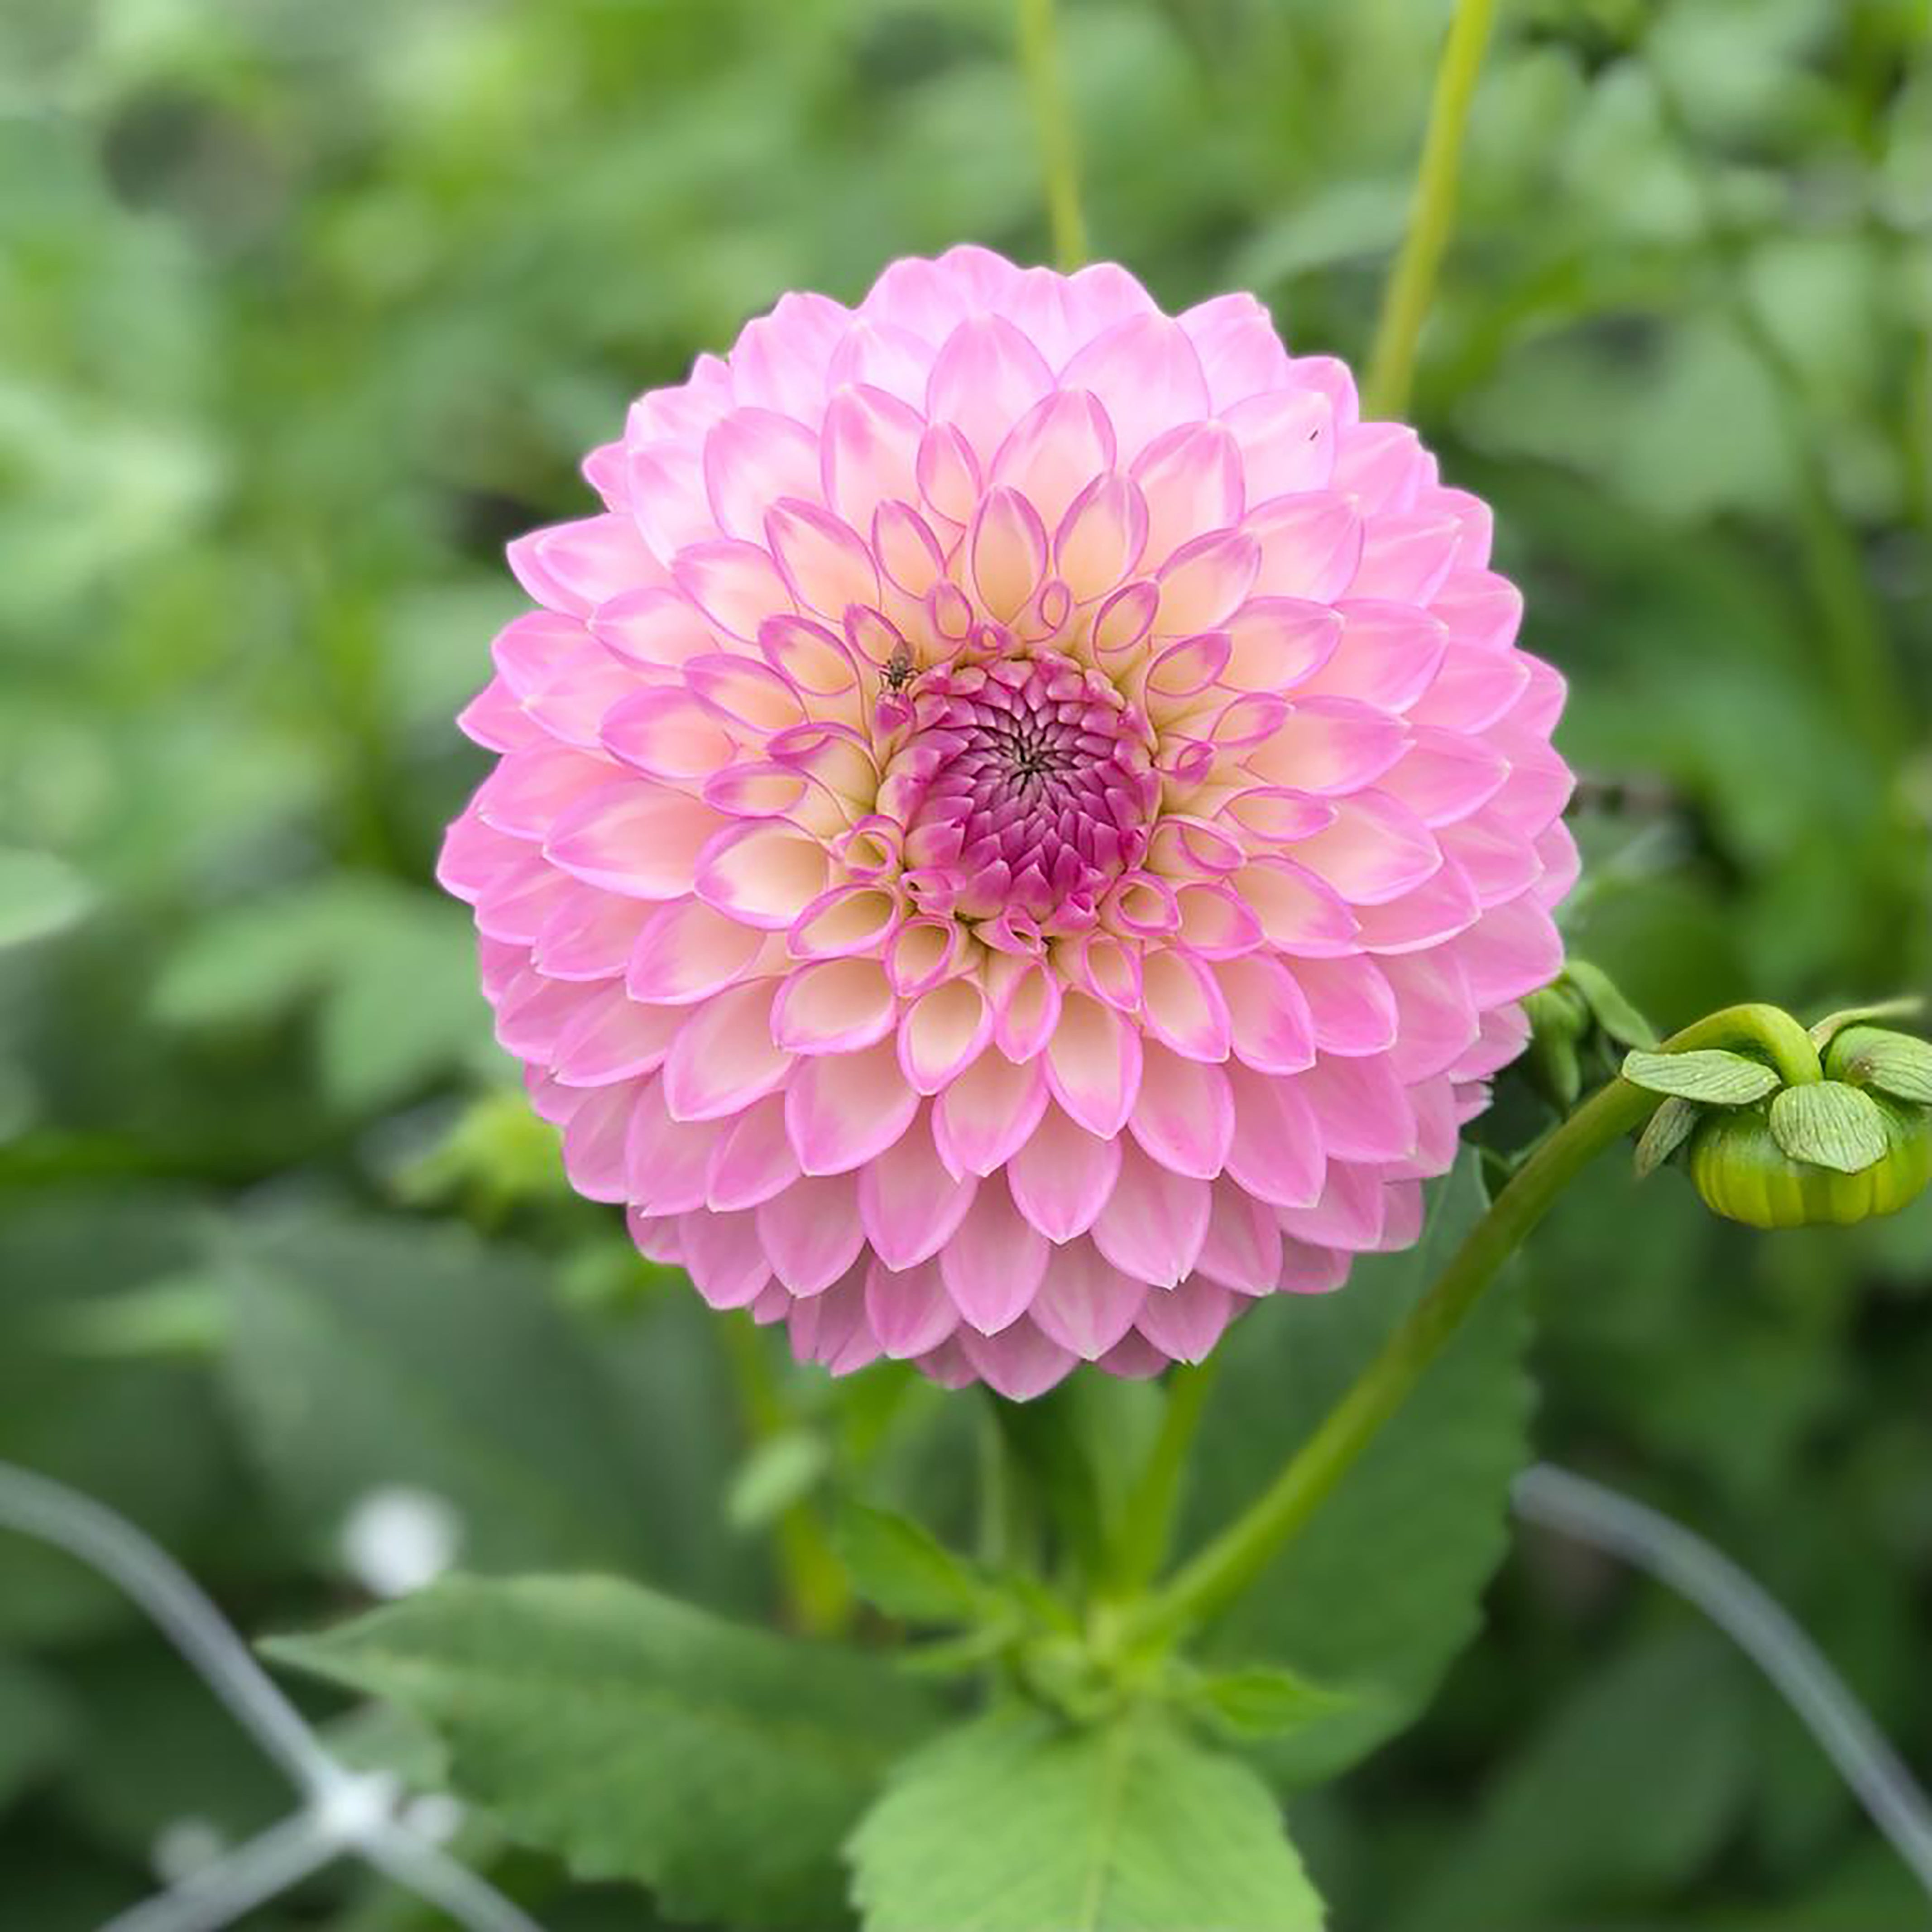 Dahlia 'Sefton Silvertop' ball flowered - 2, 3 or 5 tubers - Free delivery within the UK